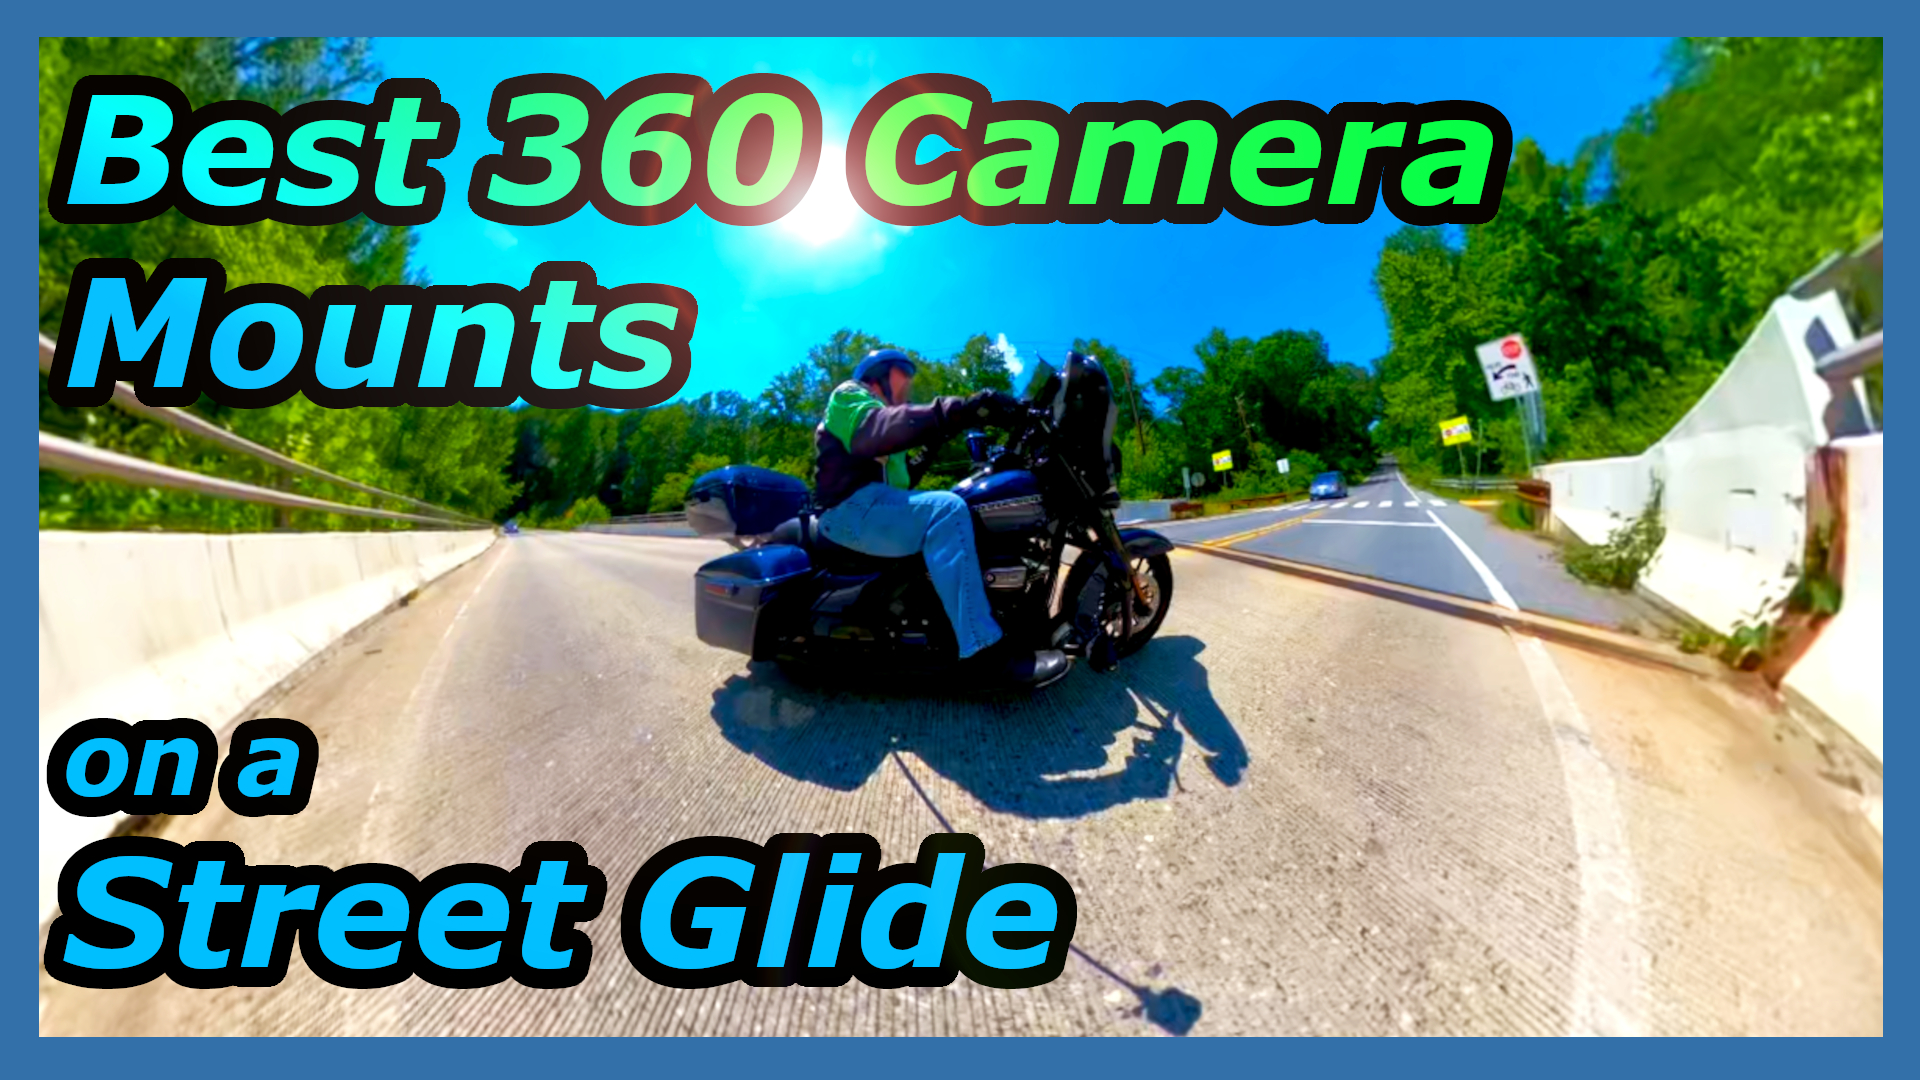 Top 5 GoPro Max / 360 Camera Mounting Spots for Harley Street Glide //